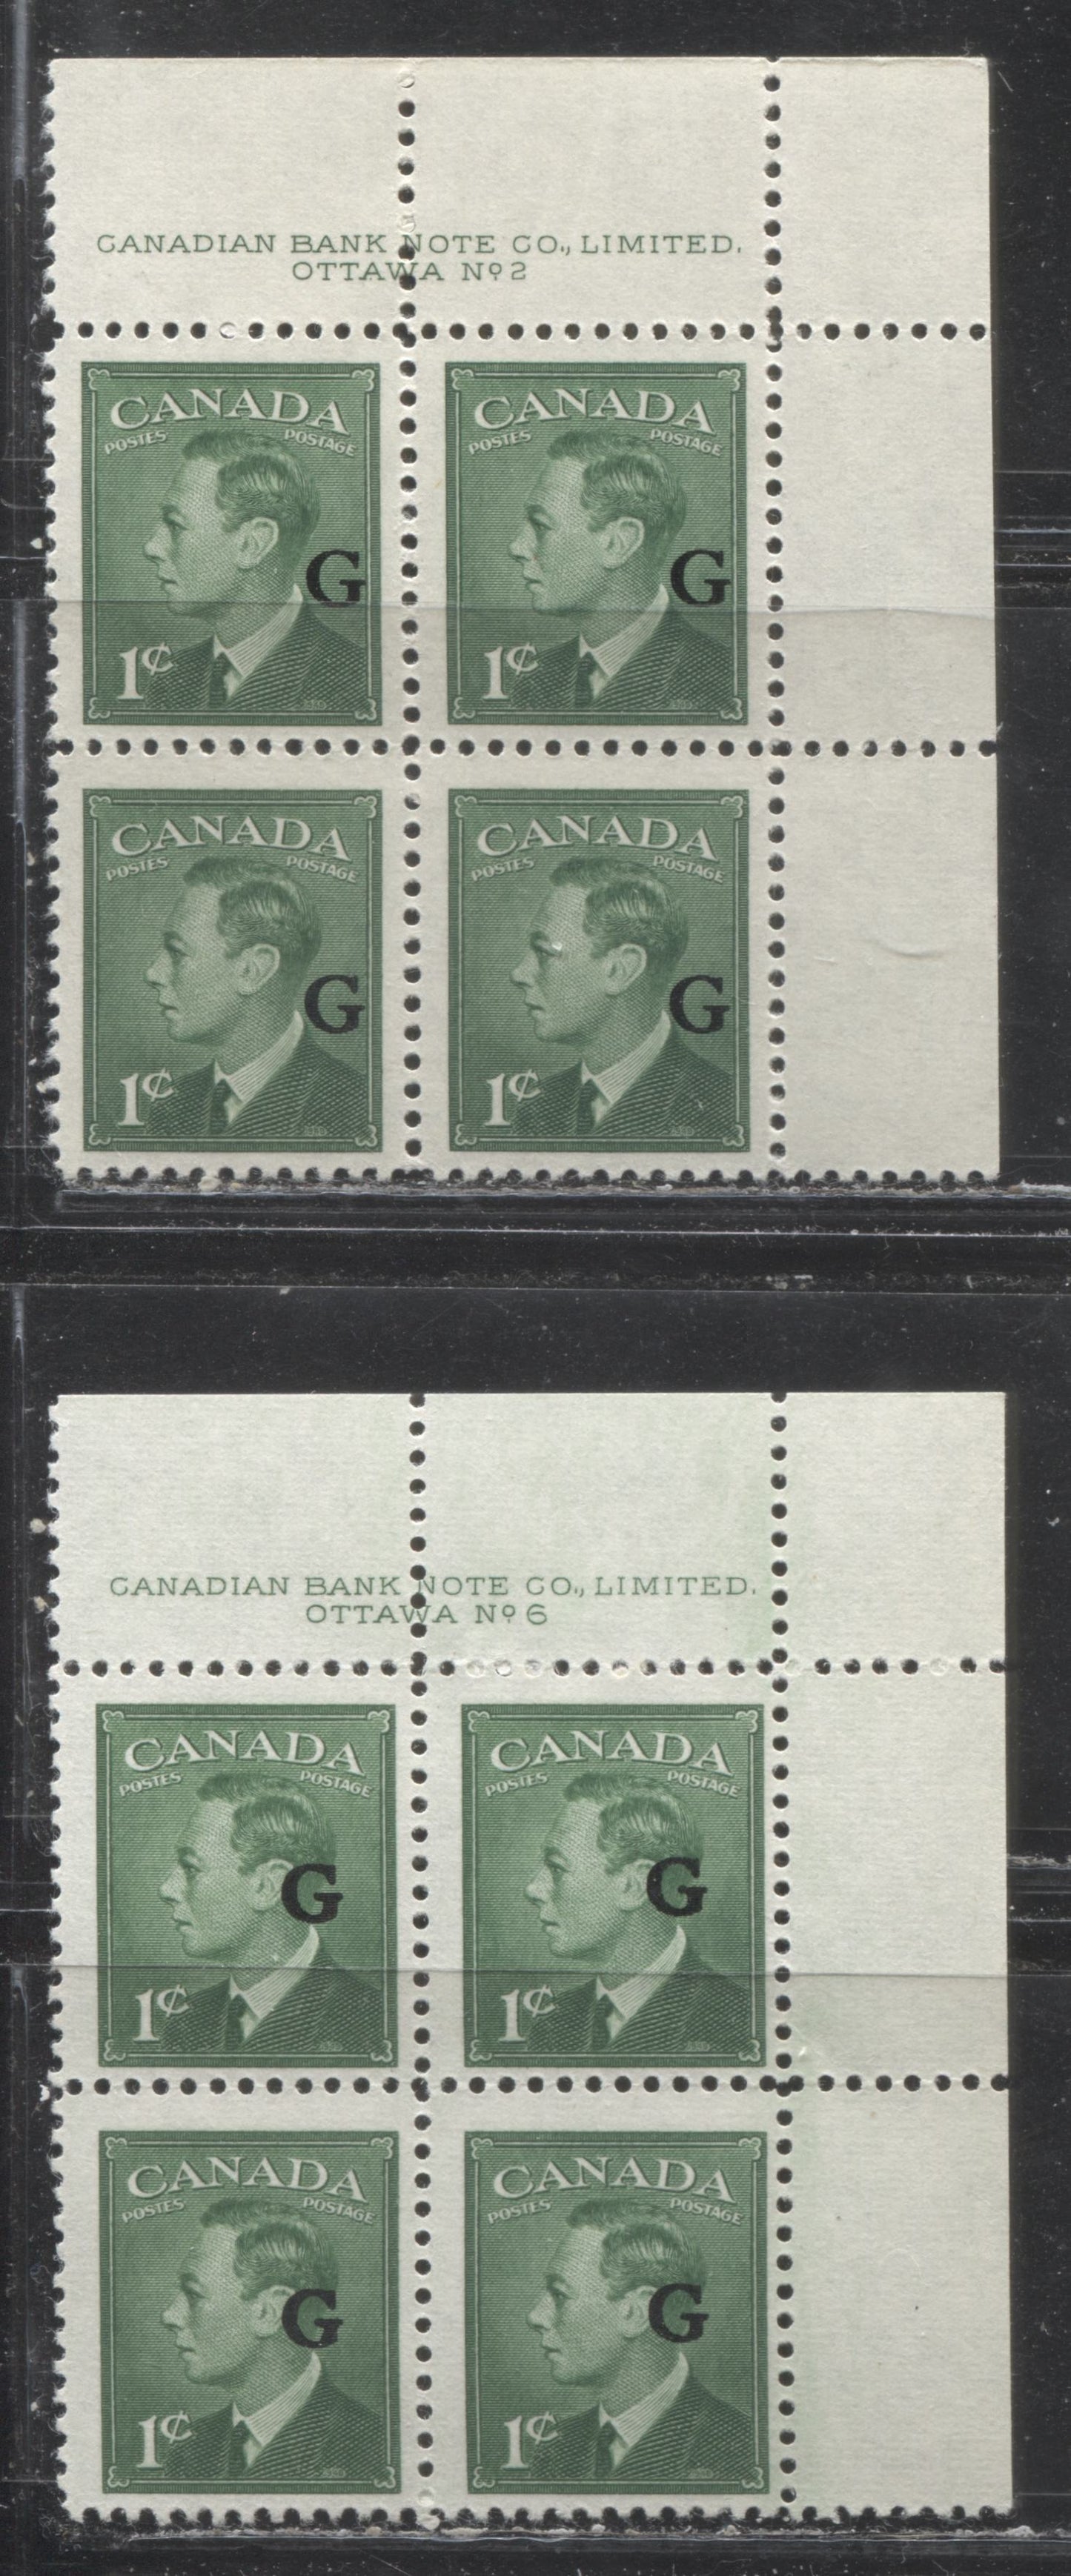 Lot 97 Canada #O16 1c Green King George VI, 1950 Postes-Postage Overprinted Issue, Two Fine NH UR Plate 2 & 6 Blocks Of 4 Misplaced G's